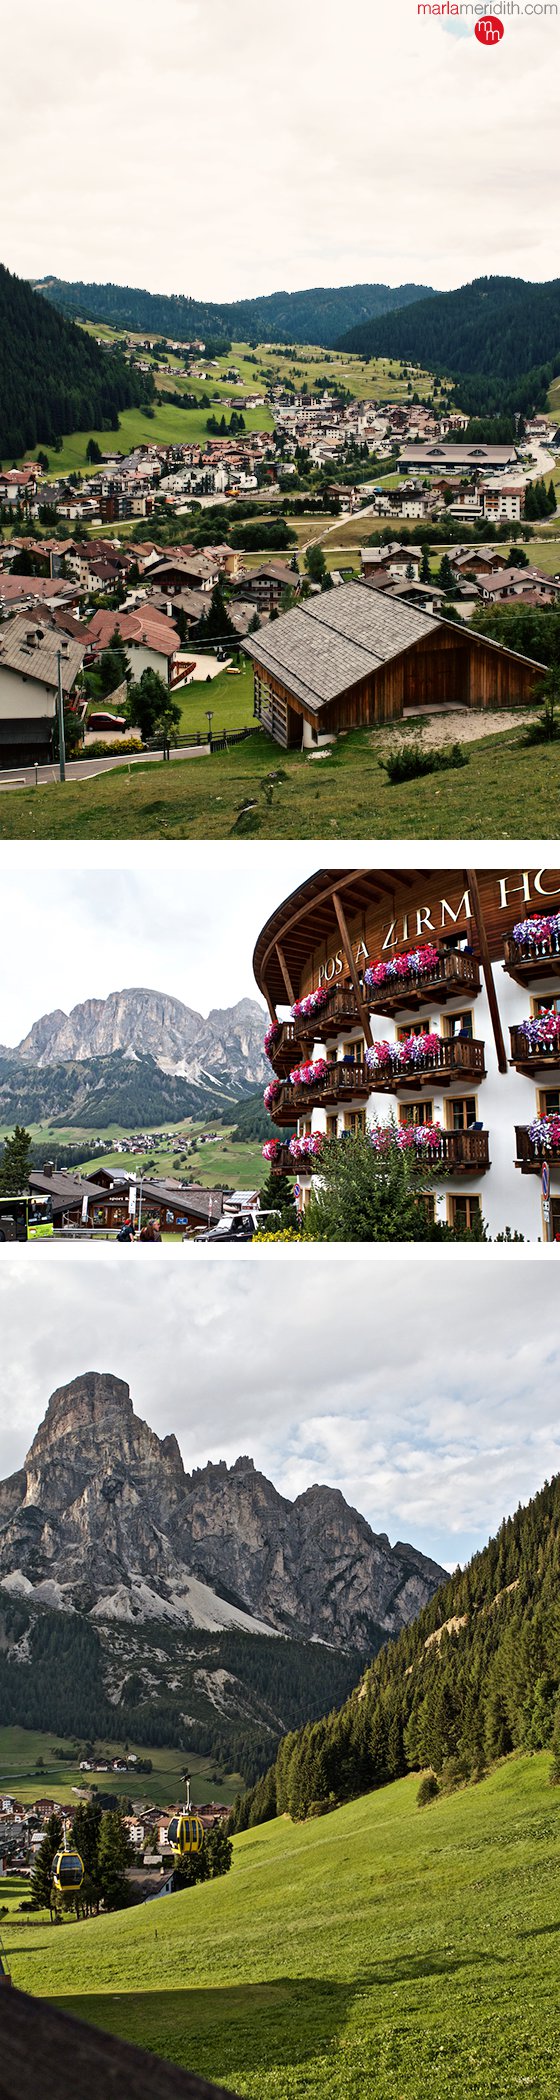 My favorite village in the #Dolomites Corvara! MarlaMeridith.com ( @marlameridith ) #italy #travel